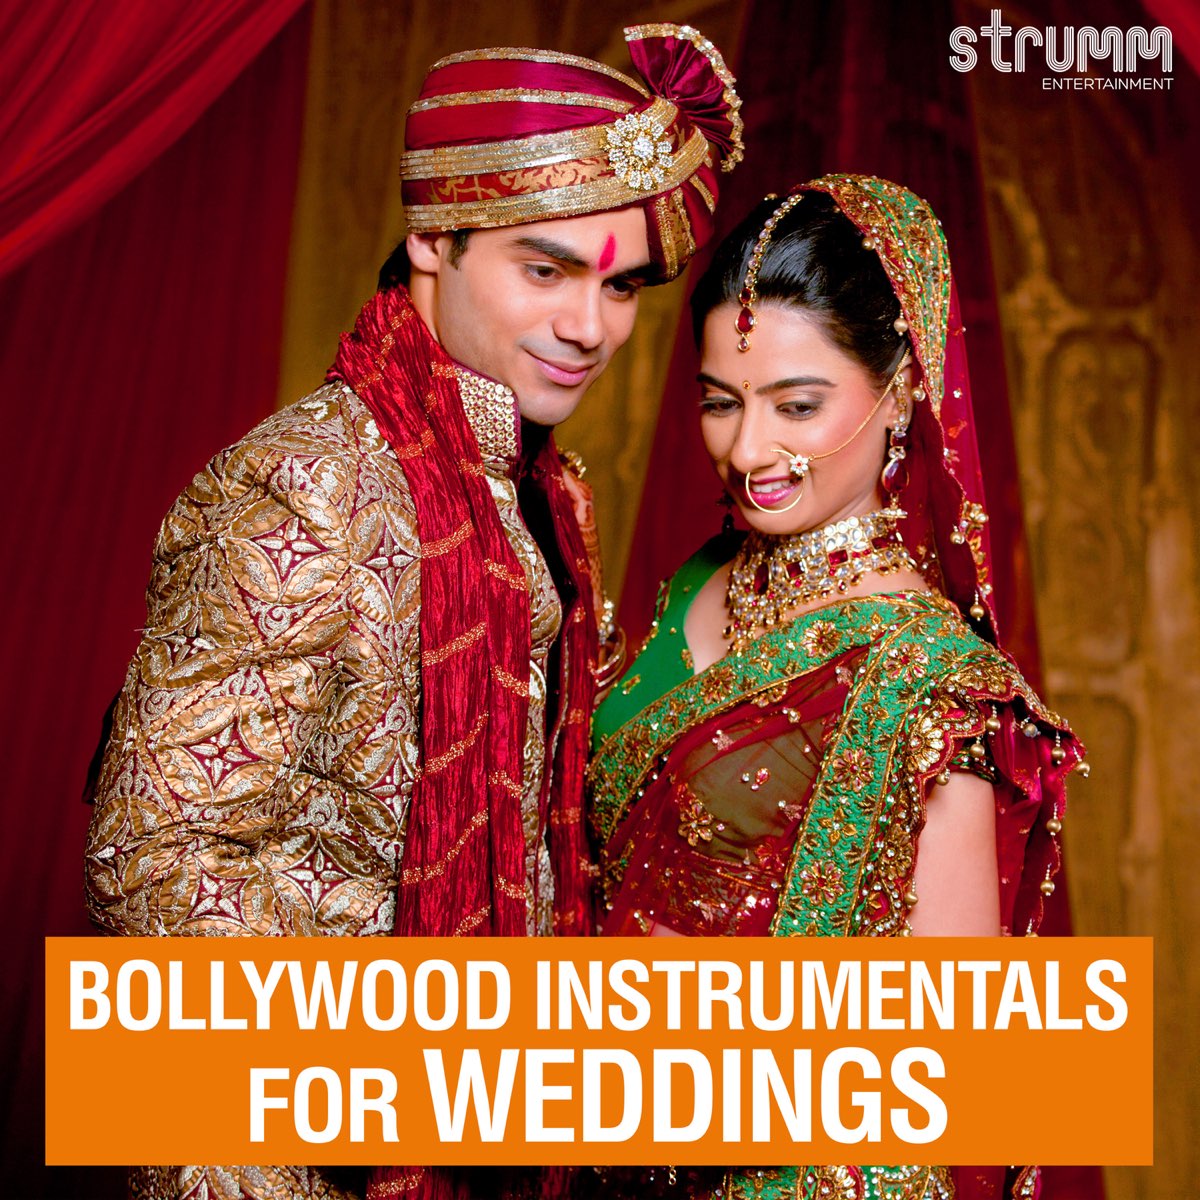 Bollywood Instrumentals for Weddings by Various Artists on Apple Music